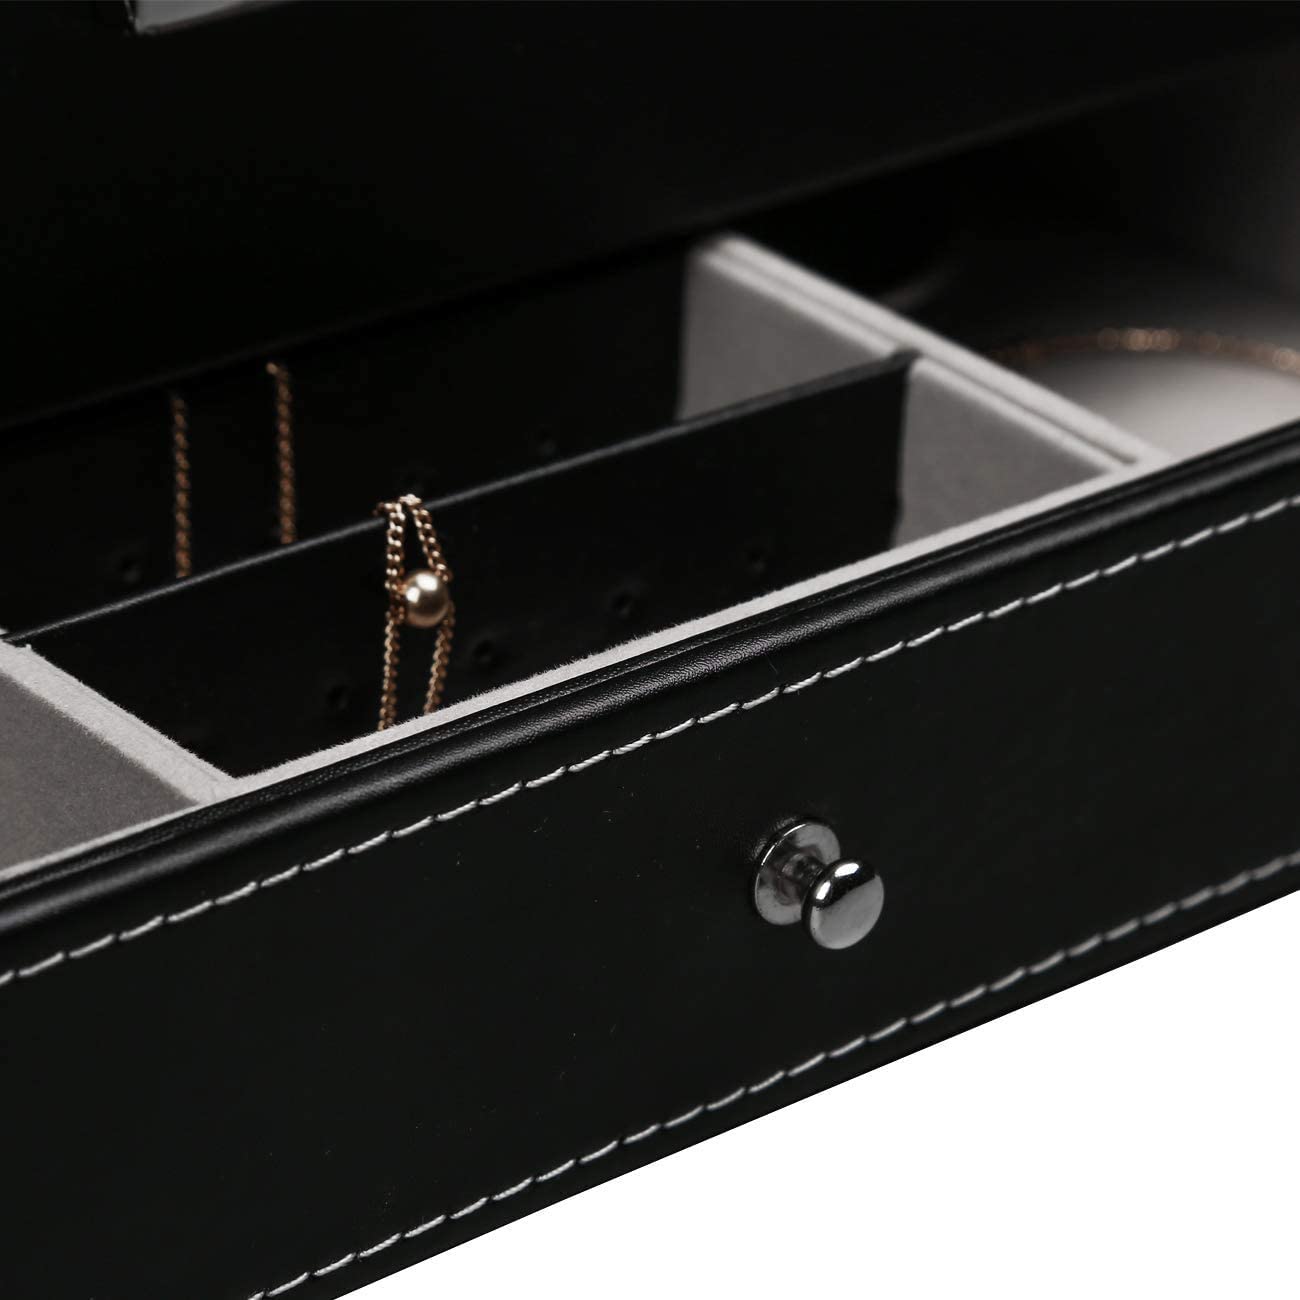 12 Slot PU Leather Lockable Watch and Jewelry Storage Boxes (Black) - BM House & Garden